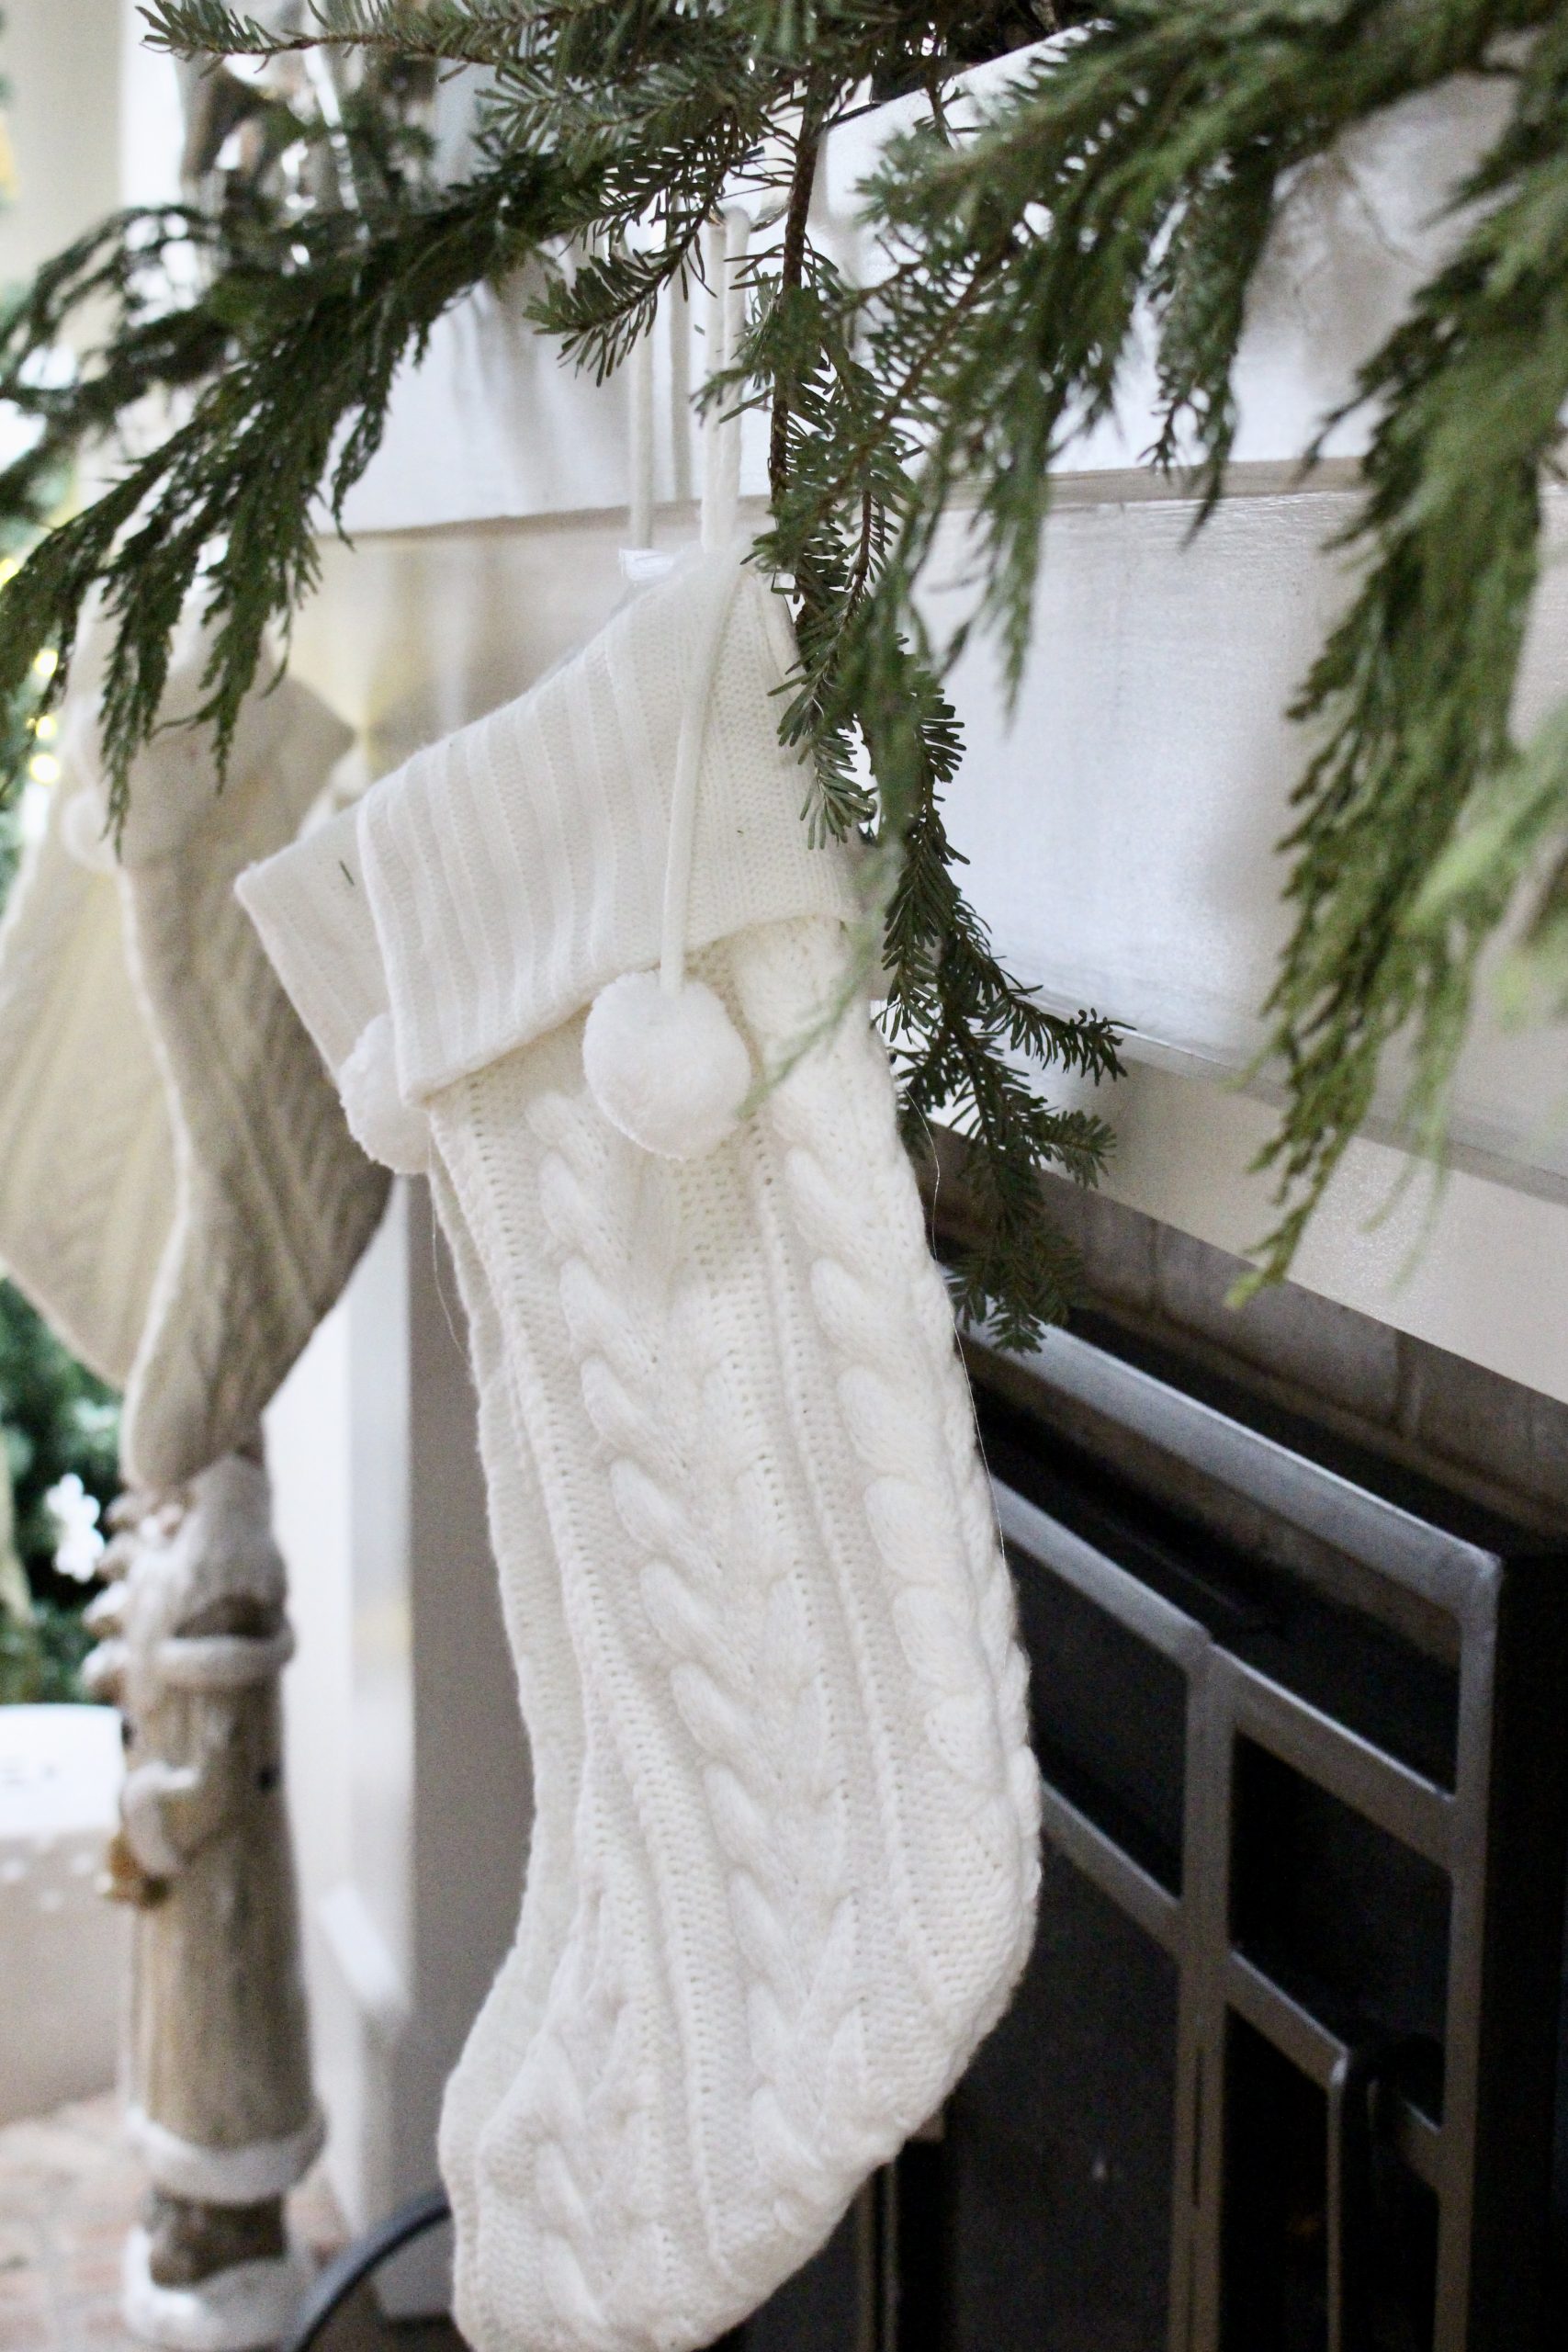 Green & Gold Christmas Family Room Tour~ White Cottage Home & Living